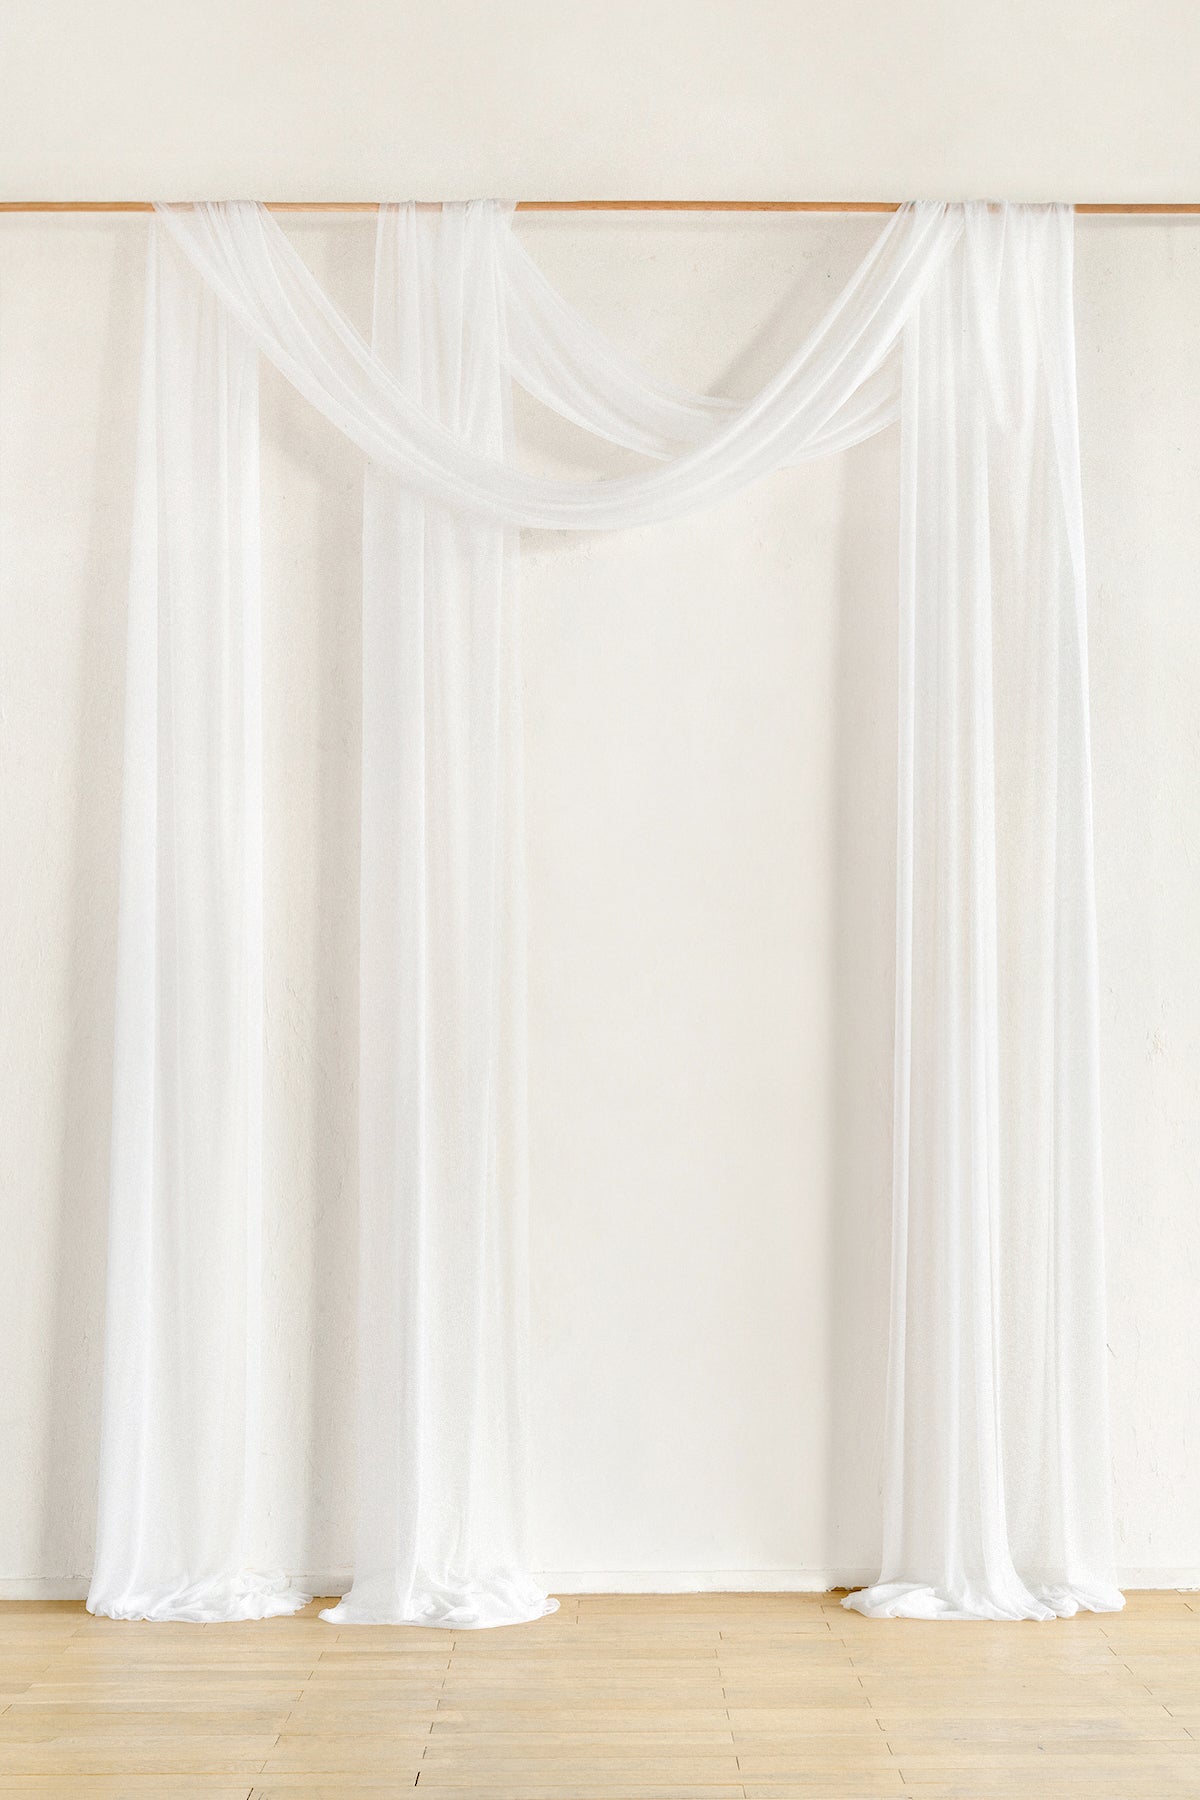 2 Panels Sheer Wedding Arch Draping 30" w x 32ft - 7 Colors